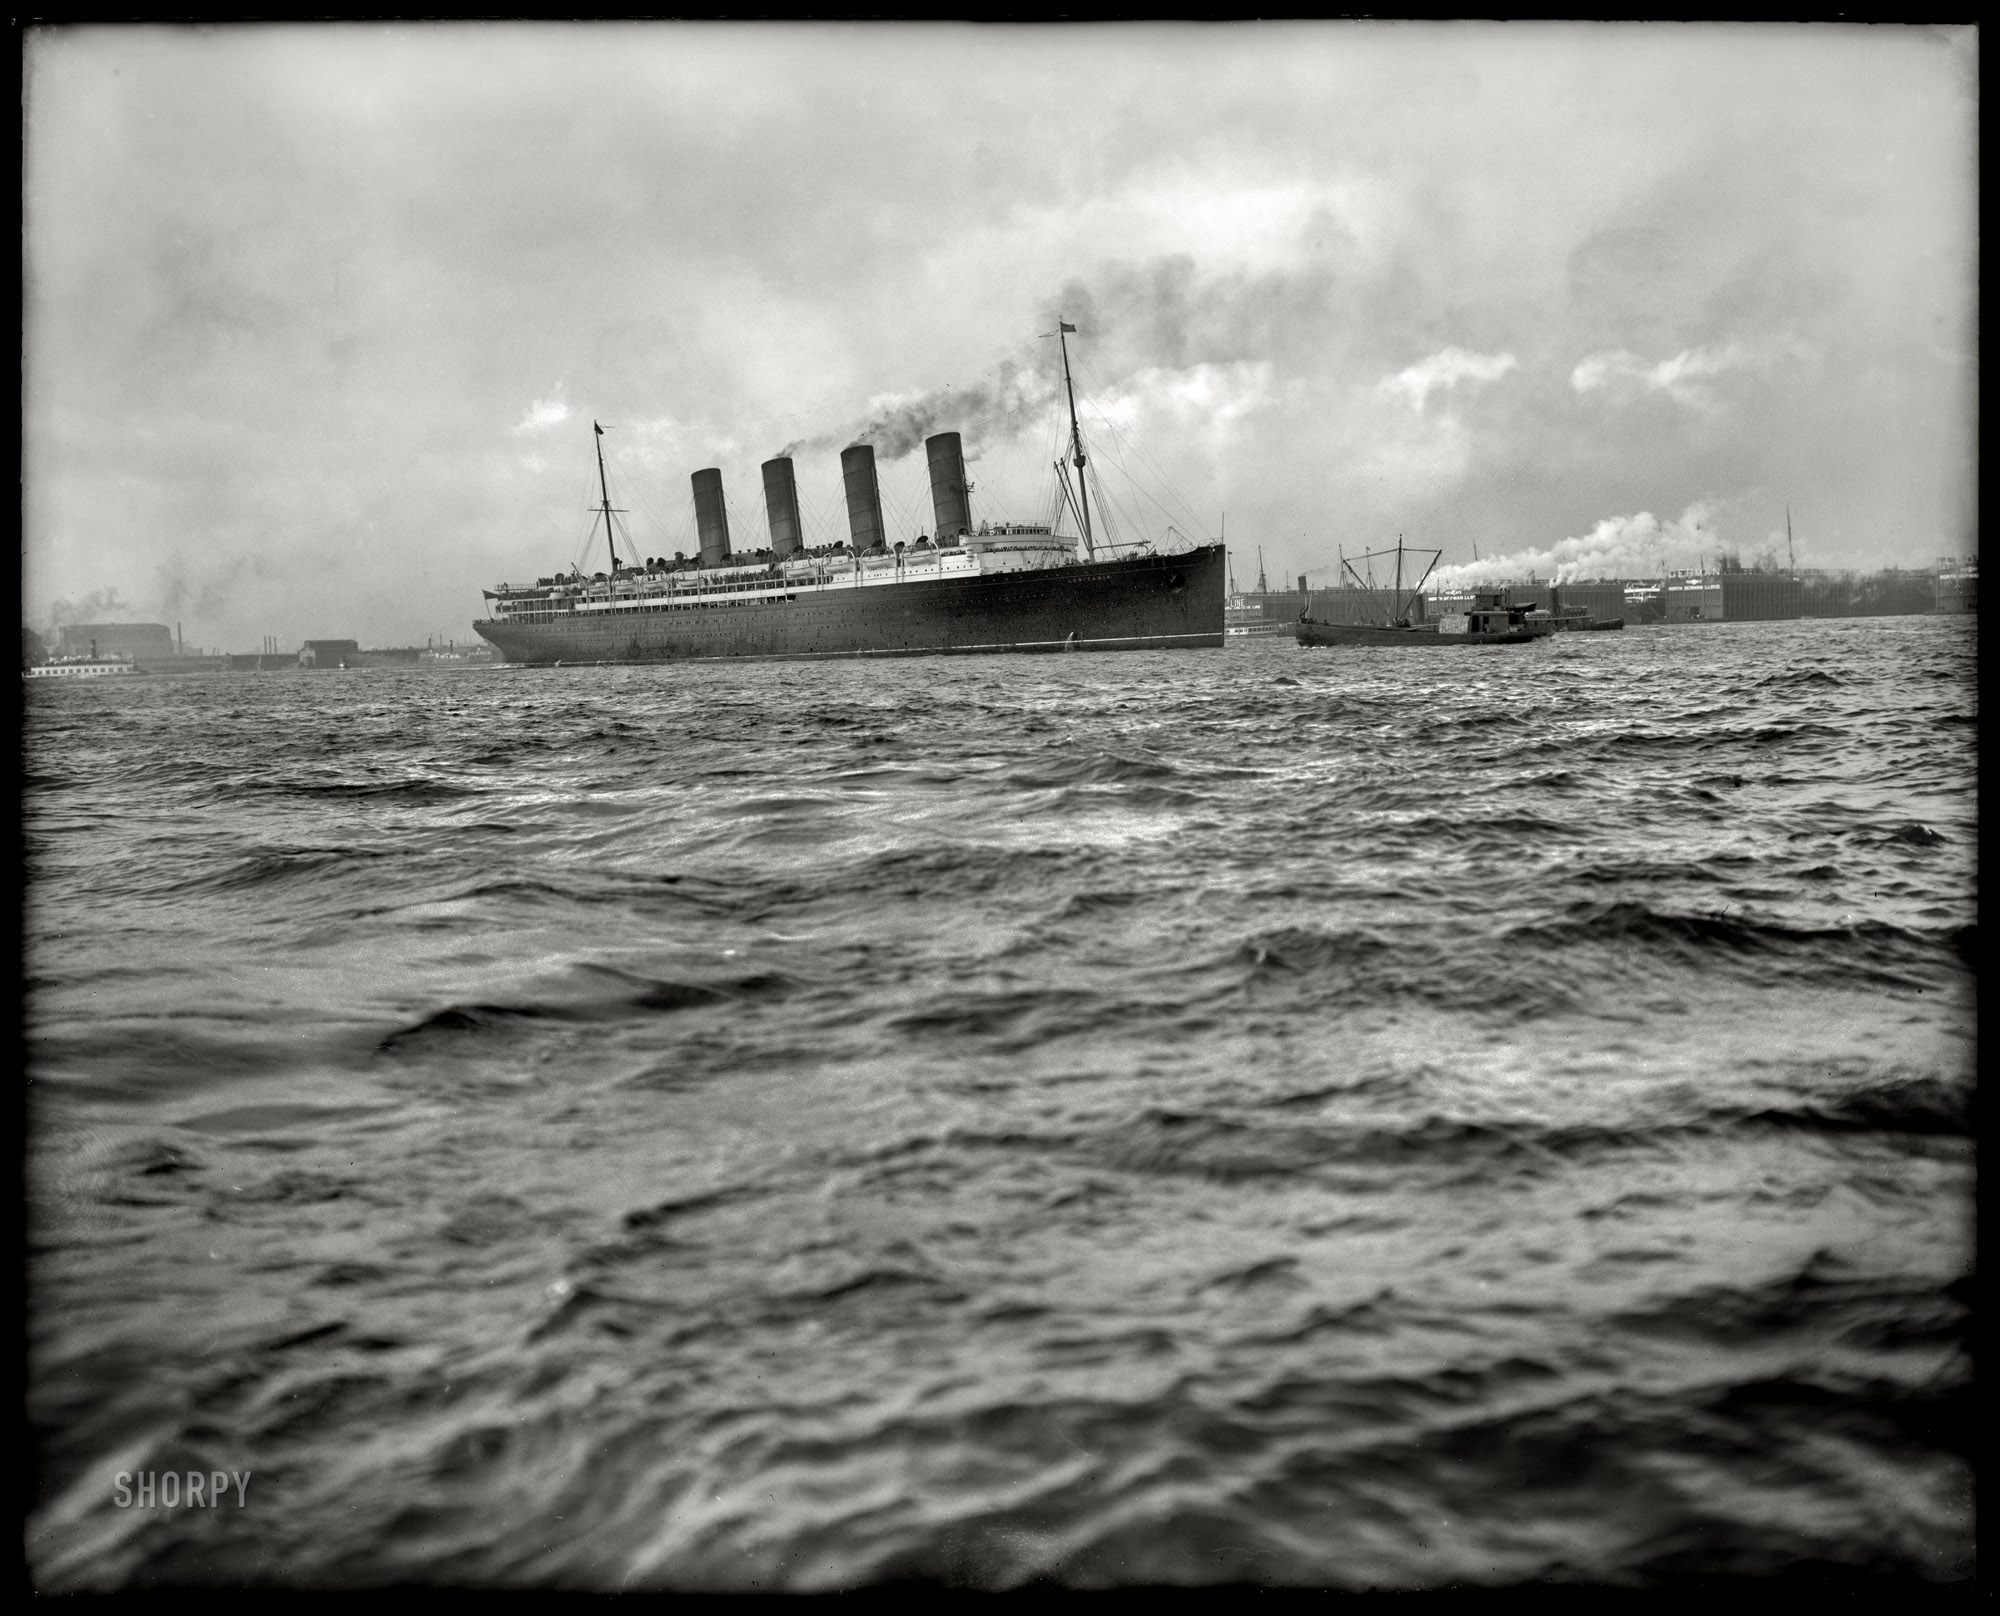 The Hudson River circa 1908. "RMS Lusitania passing Hoboken piers." The doomed Cunard ocean liner would be torpedoed by a German submarine in 1915 with a loss of 1,198 lives. Detroit Publishing glass negative. View full size.